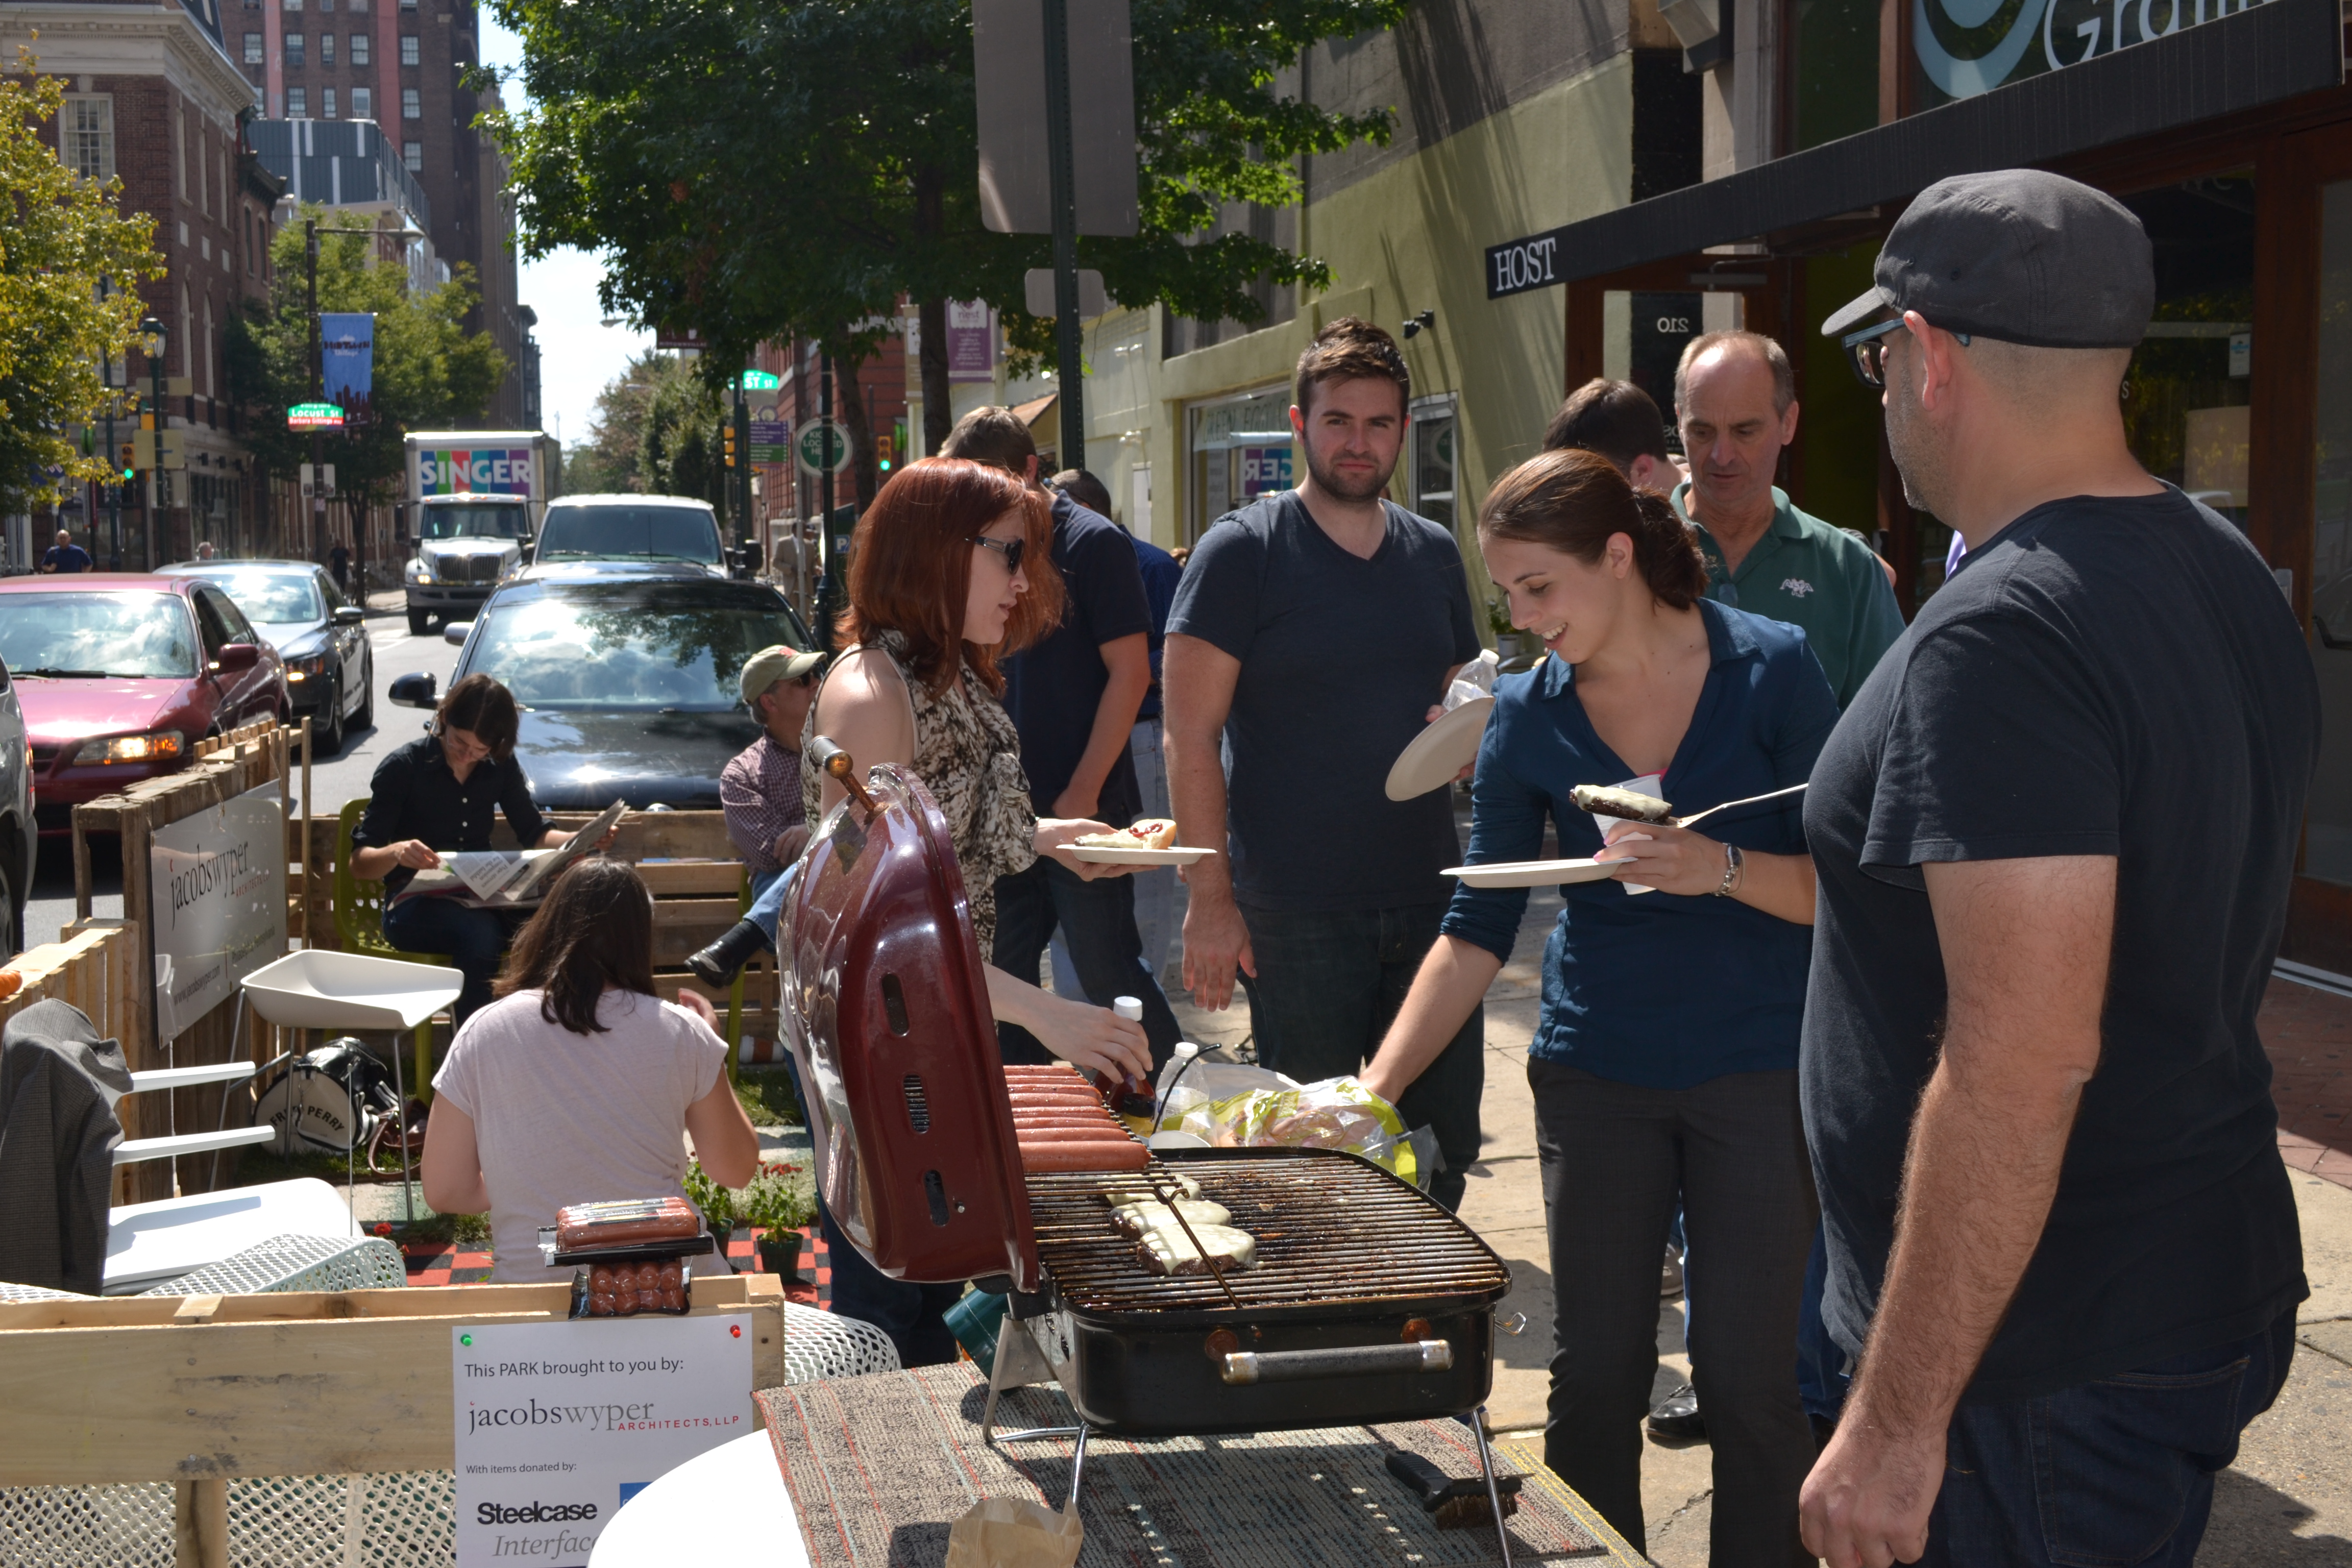 Park(ing) Day: Jacobs/Wyper Architects